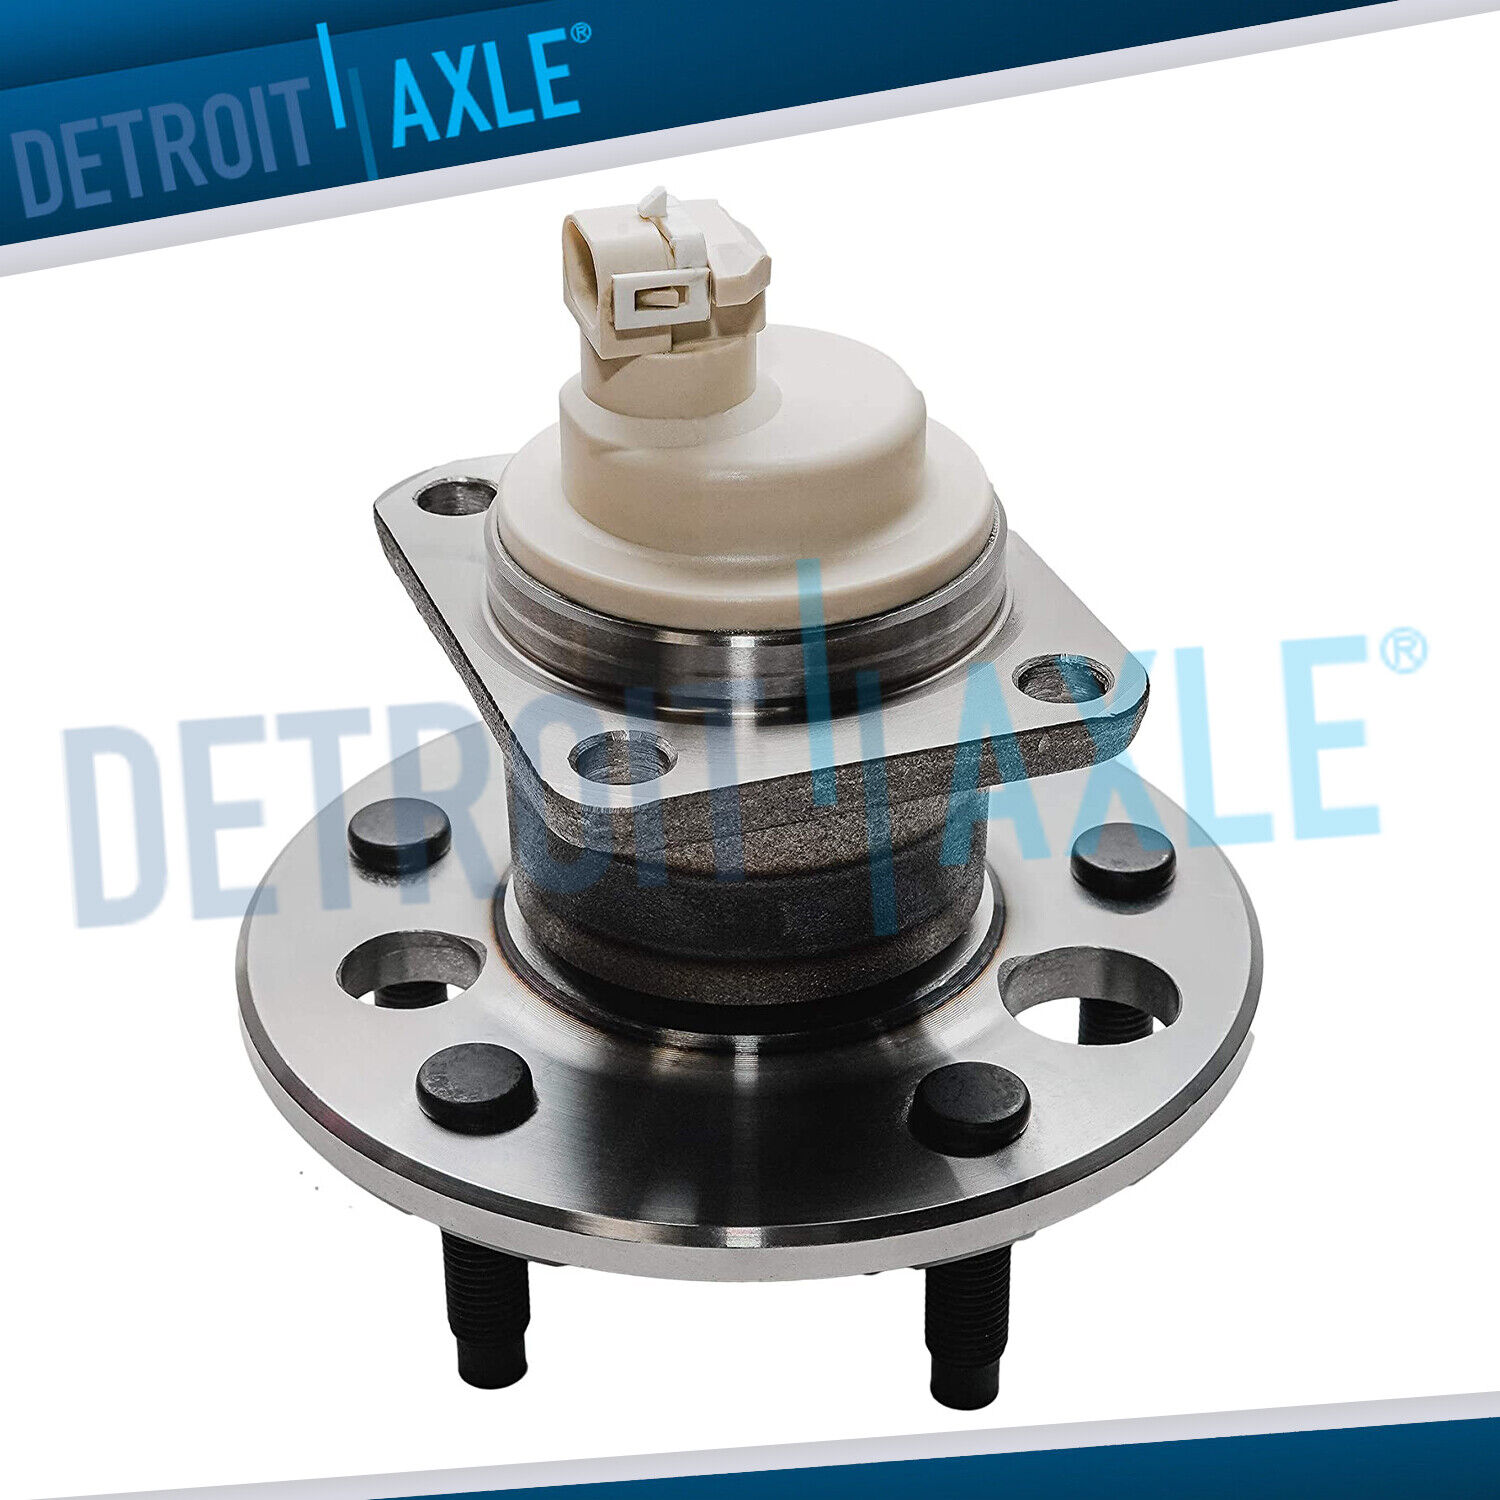 FWD REAR Wheel Hub and Bearing Assembly for Allure Century LaCrosse Regal Impala